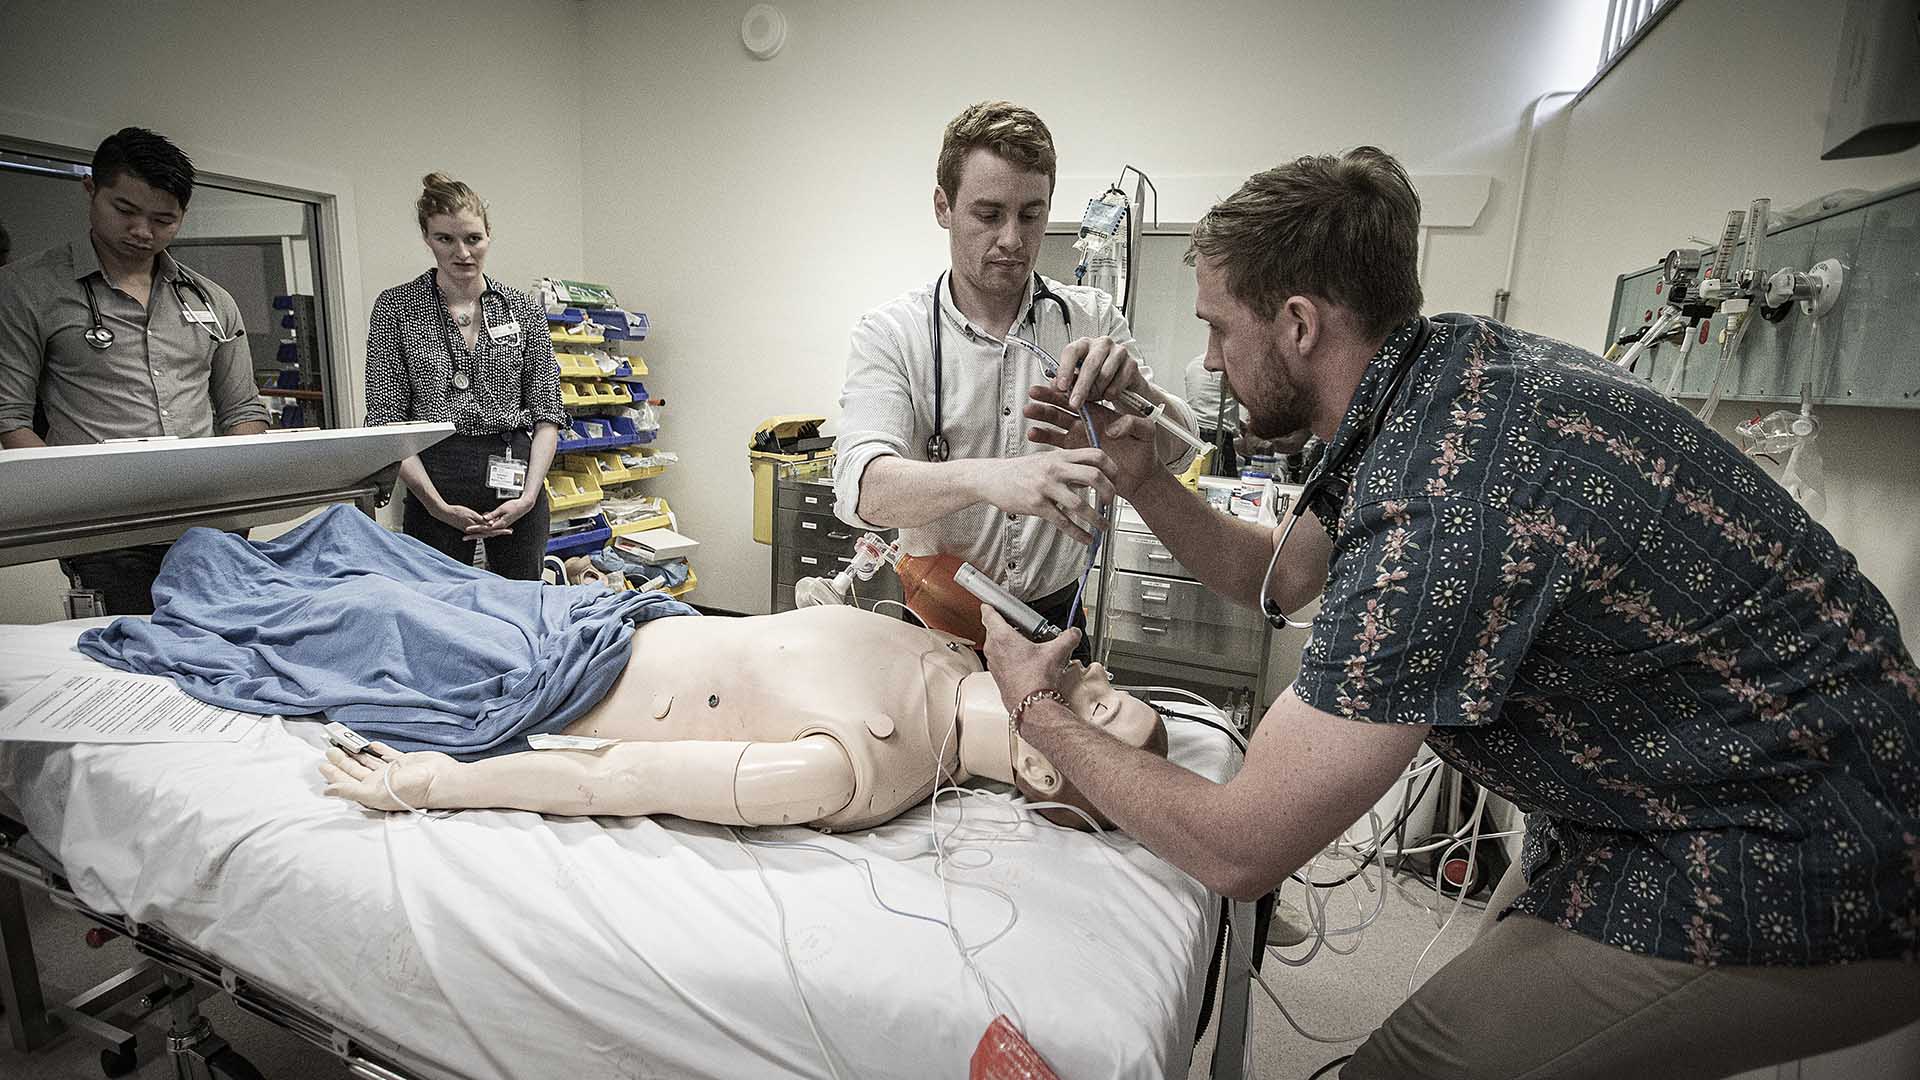 A team of UOW Graduate Medicine students on placement at Grafton Base Hospital on the NSW north coast in 2019.The students spent 12 months in the Clarence Valley, learning and training in partnership with health professionals in the region.